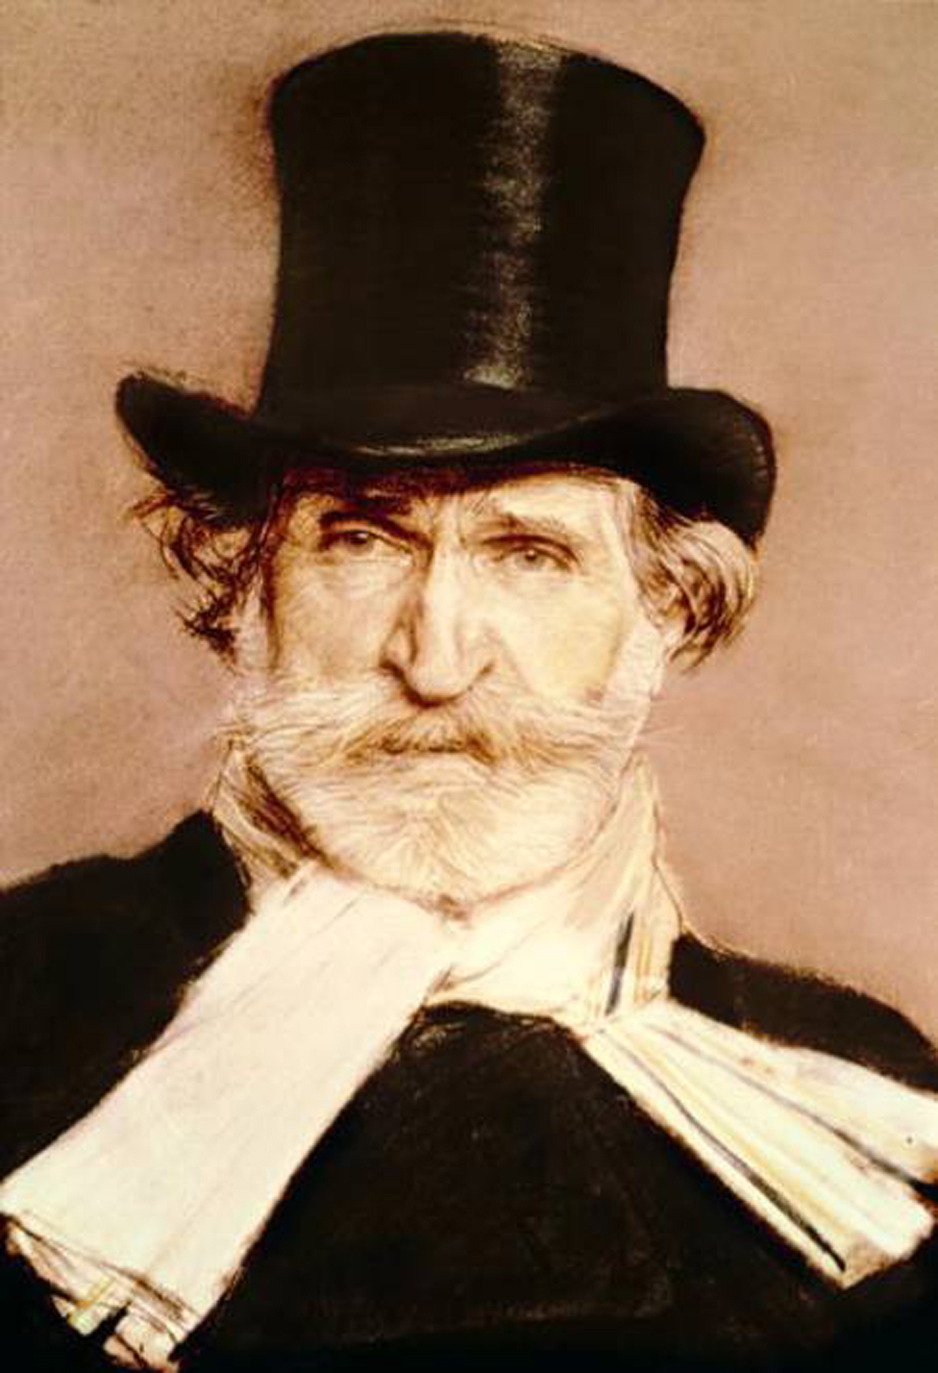 what is the soul of a verdi opera